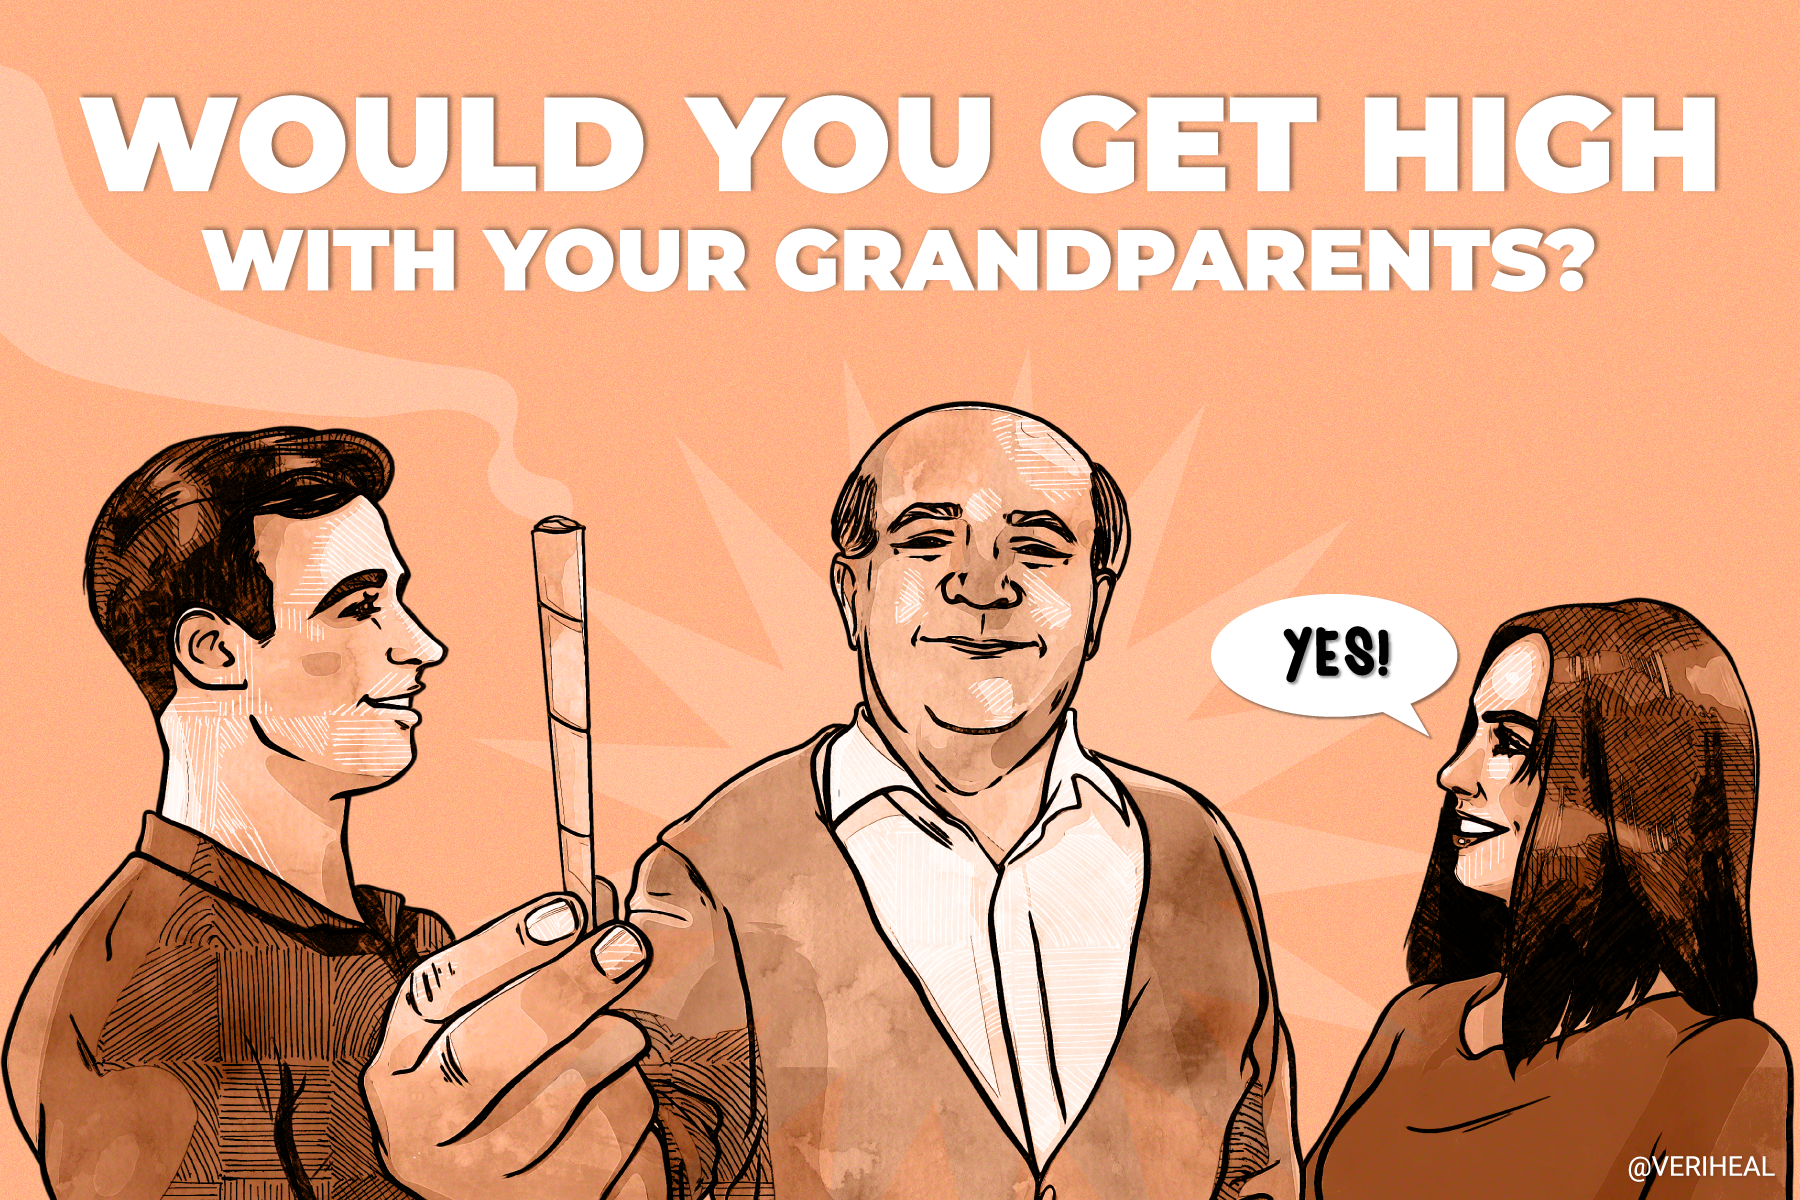 A Survey Reveals 60% of People Would Get High With Their Grandparents